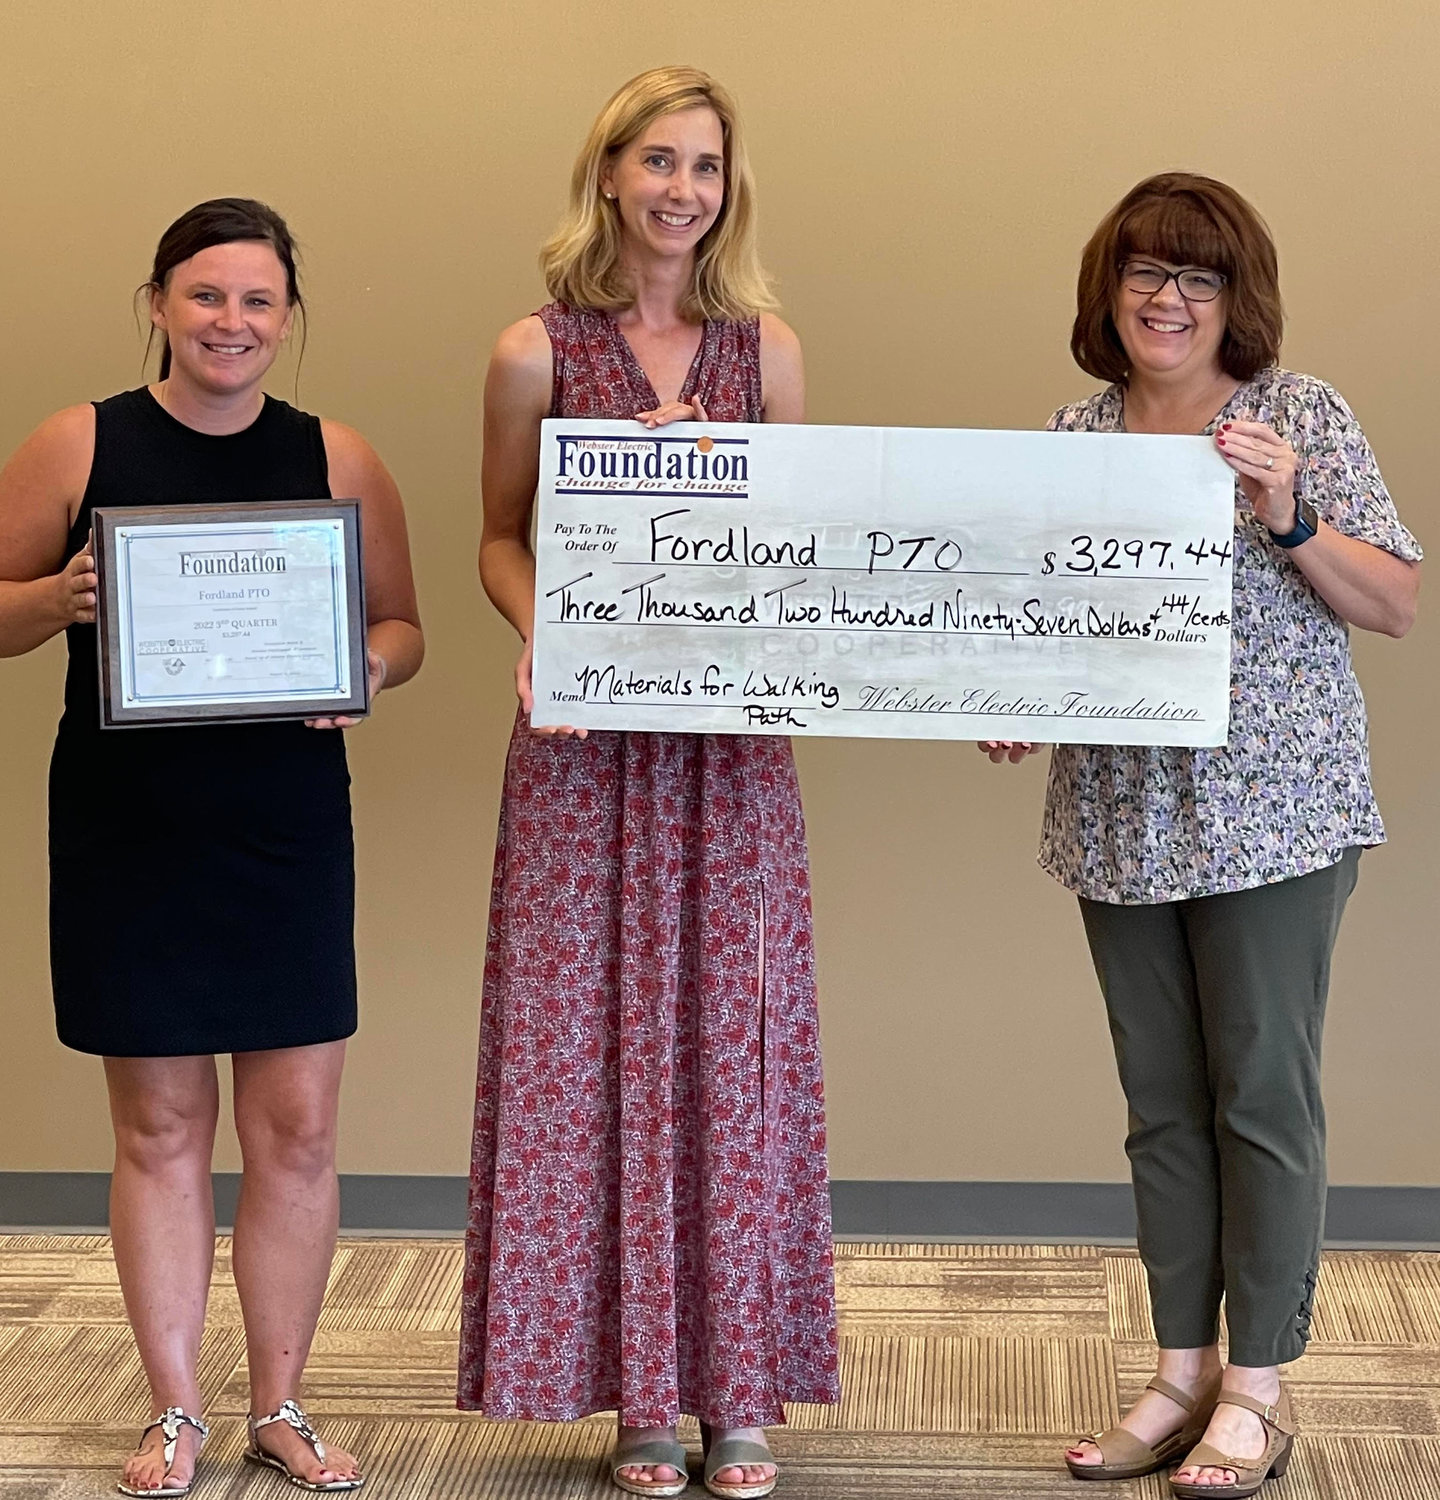 Fordland PTO accepts a grant in the amount of $3,297.44 to purchase materials to build a walking path on the Fordland Elementary Playground.